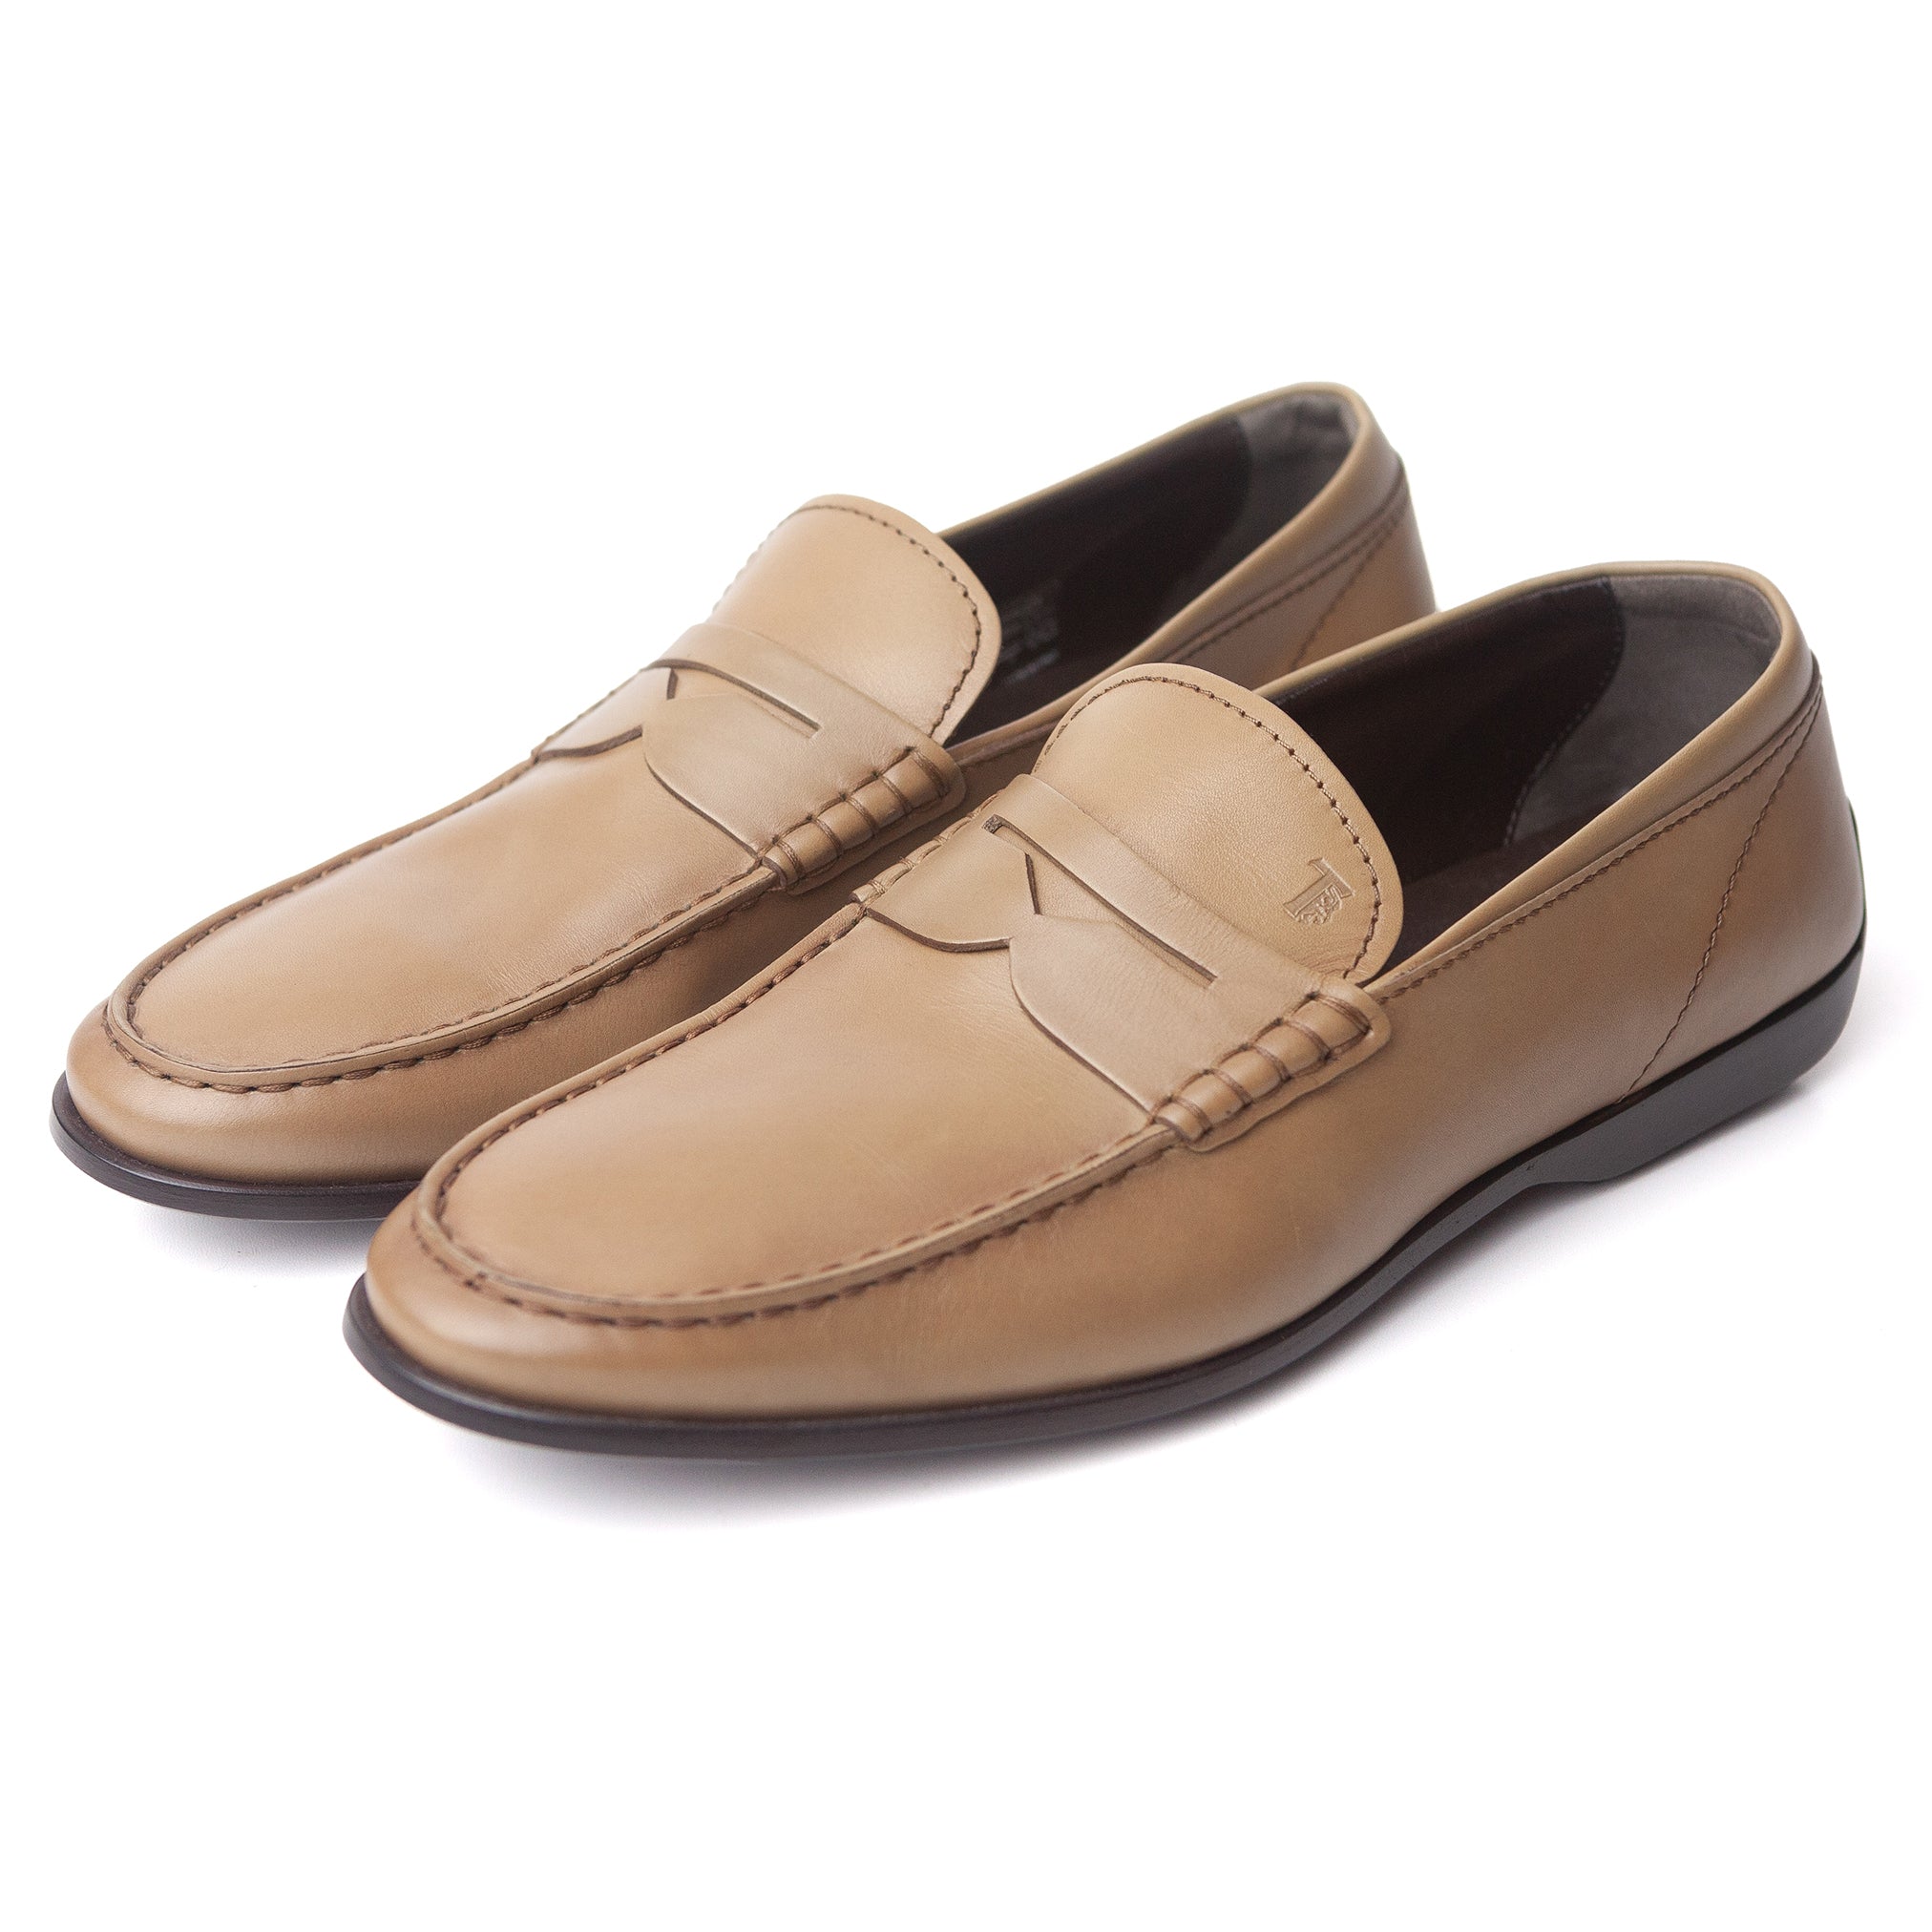 Moccasins in Tan Leather (40)